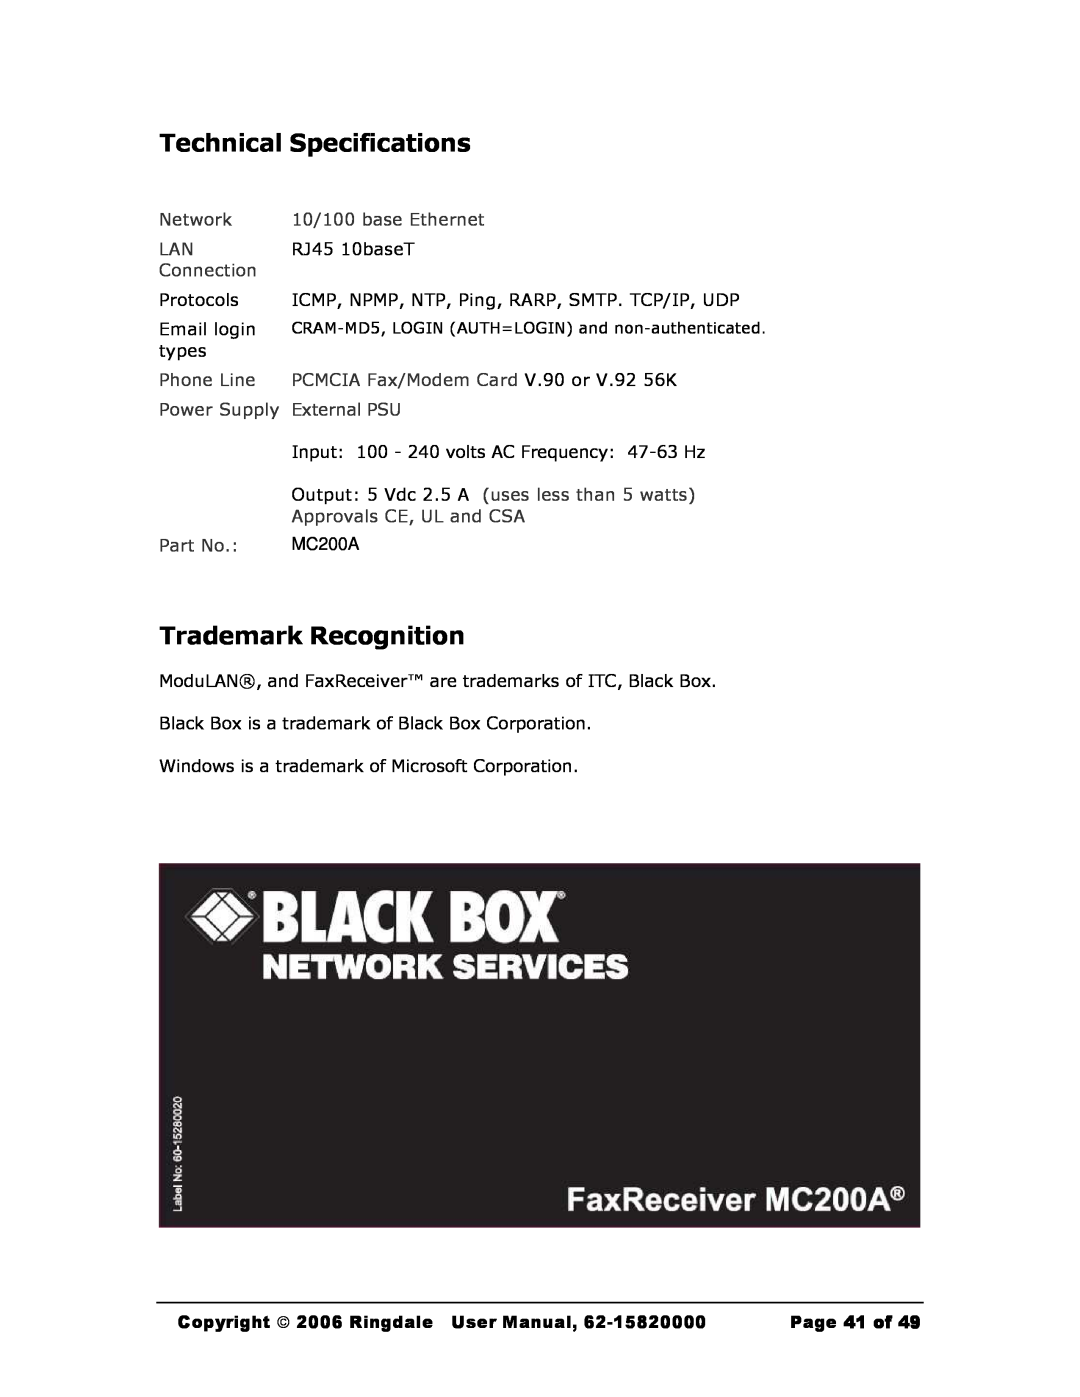 Black Box Black Box Network Services FaxReceiver, MC200A Technical Specifications, Trademark Recognition, Page 41 of 